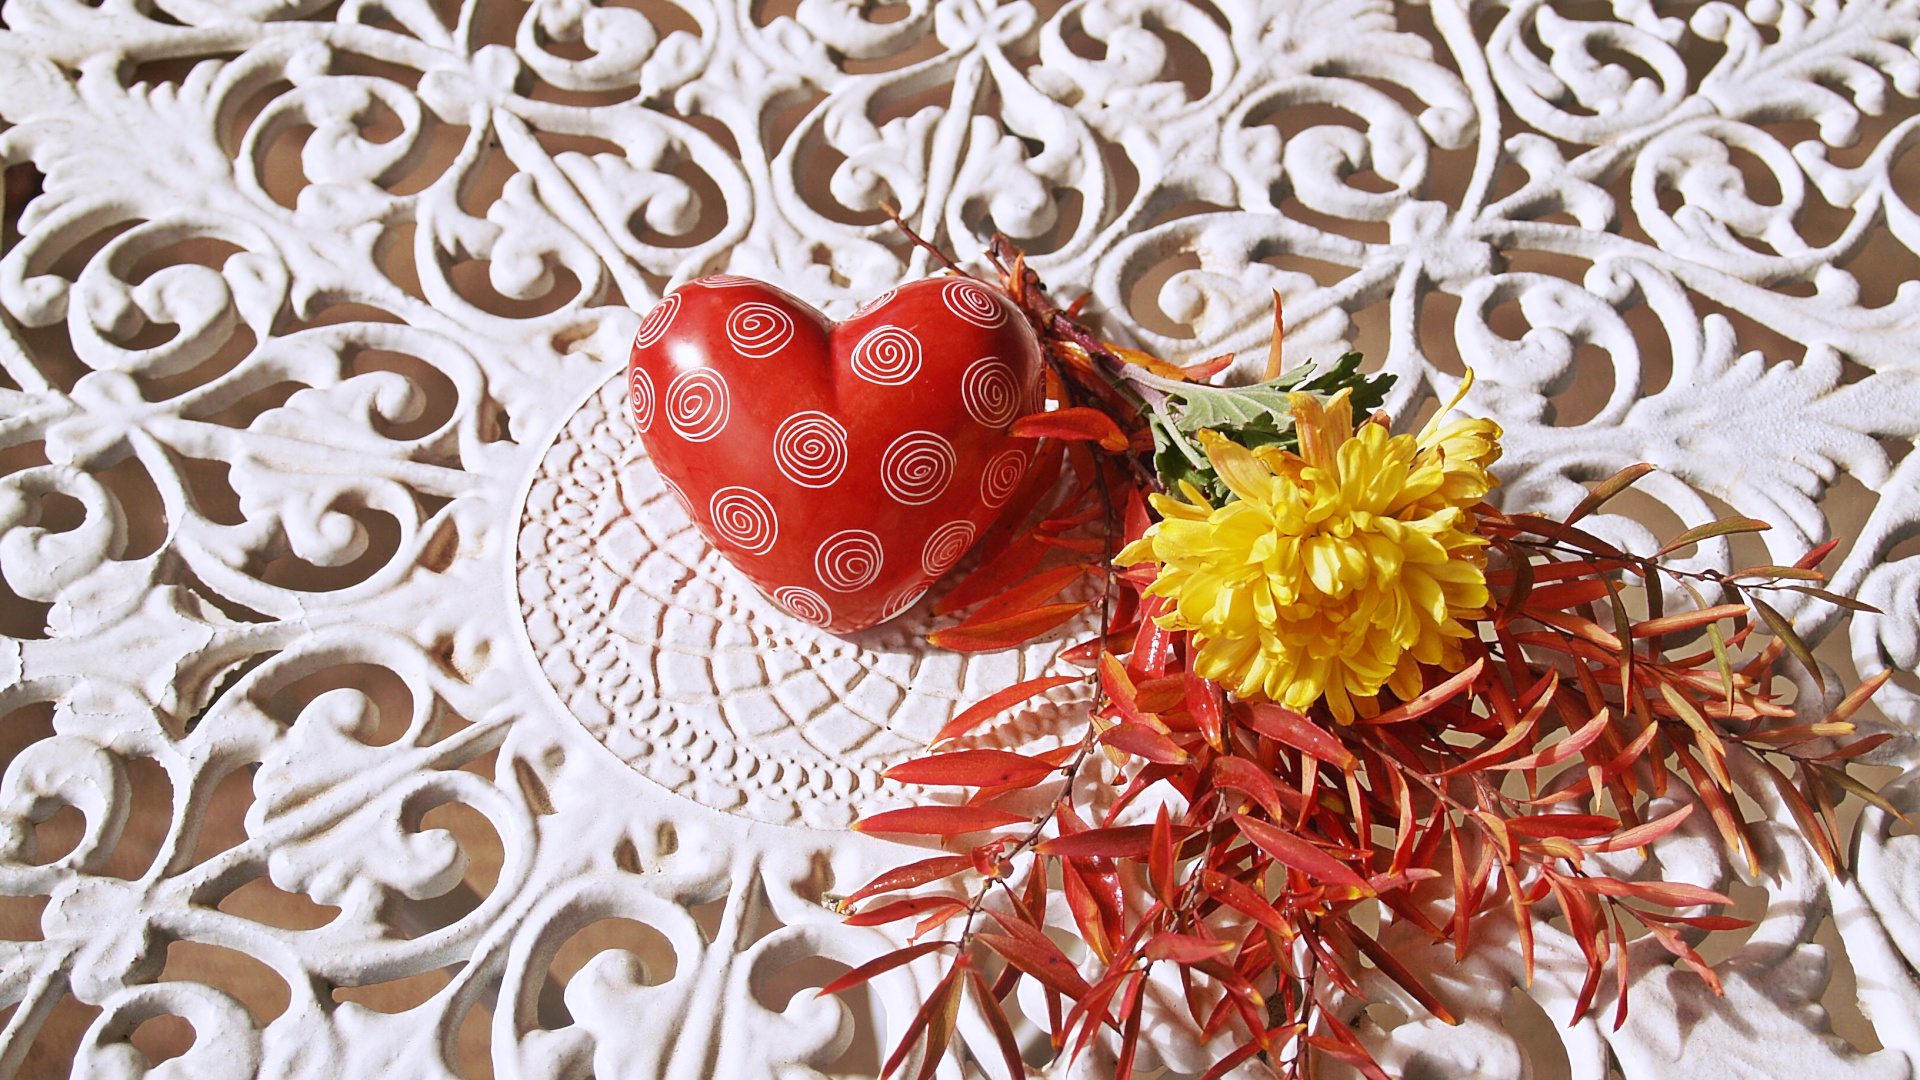 Flower, Red, Food, Textile, Plant. Wallpaper in 1920x1080 Resolution